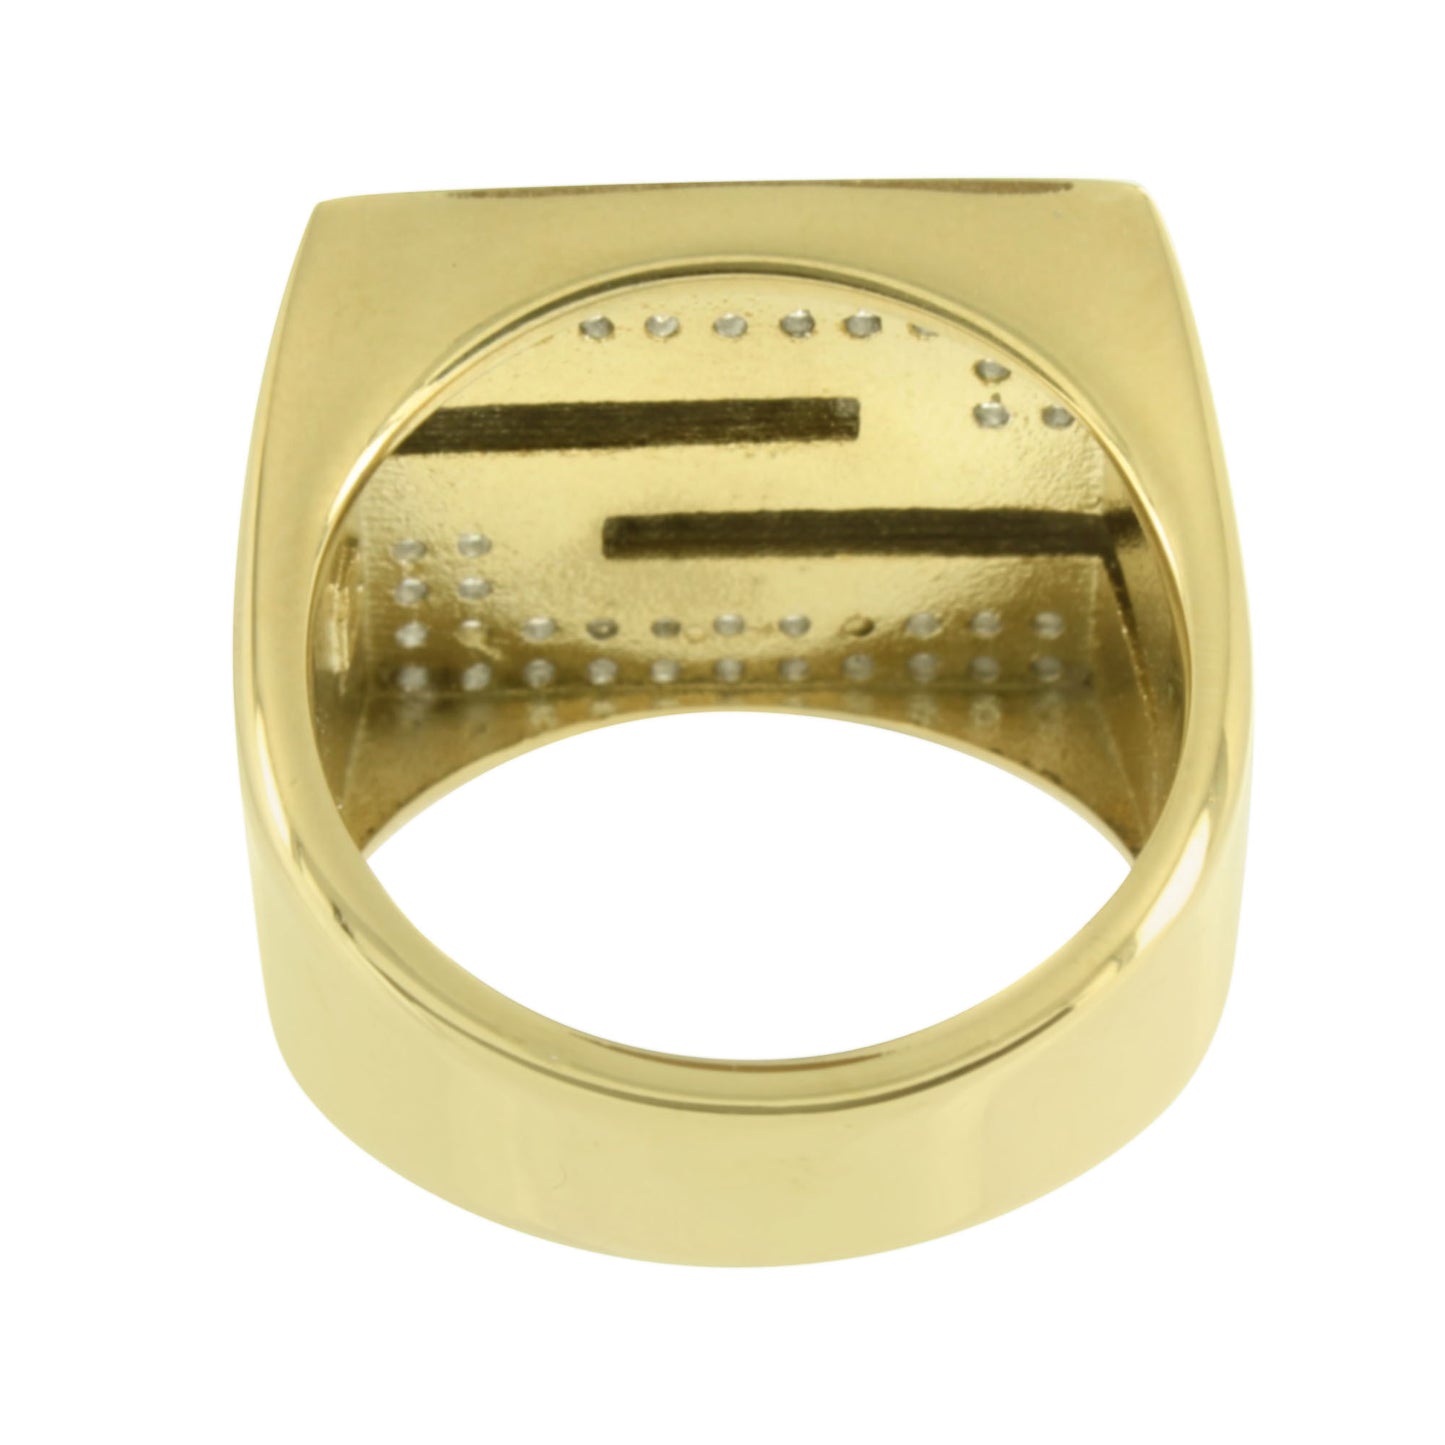 Stainless Steel Mens Ring Gold Finish Wedding Simulated Diamonds Engagement Sale